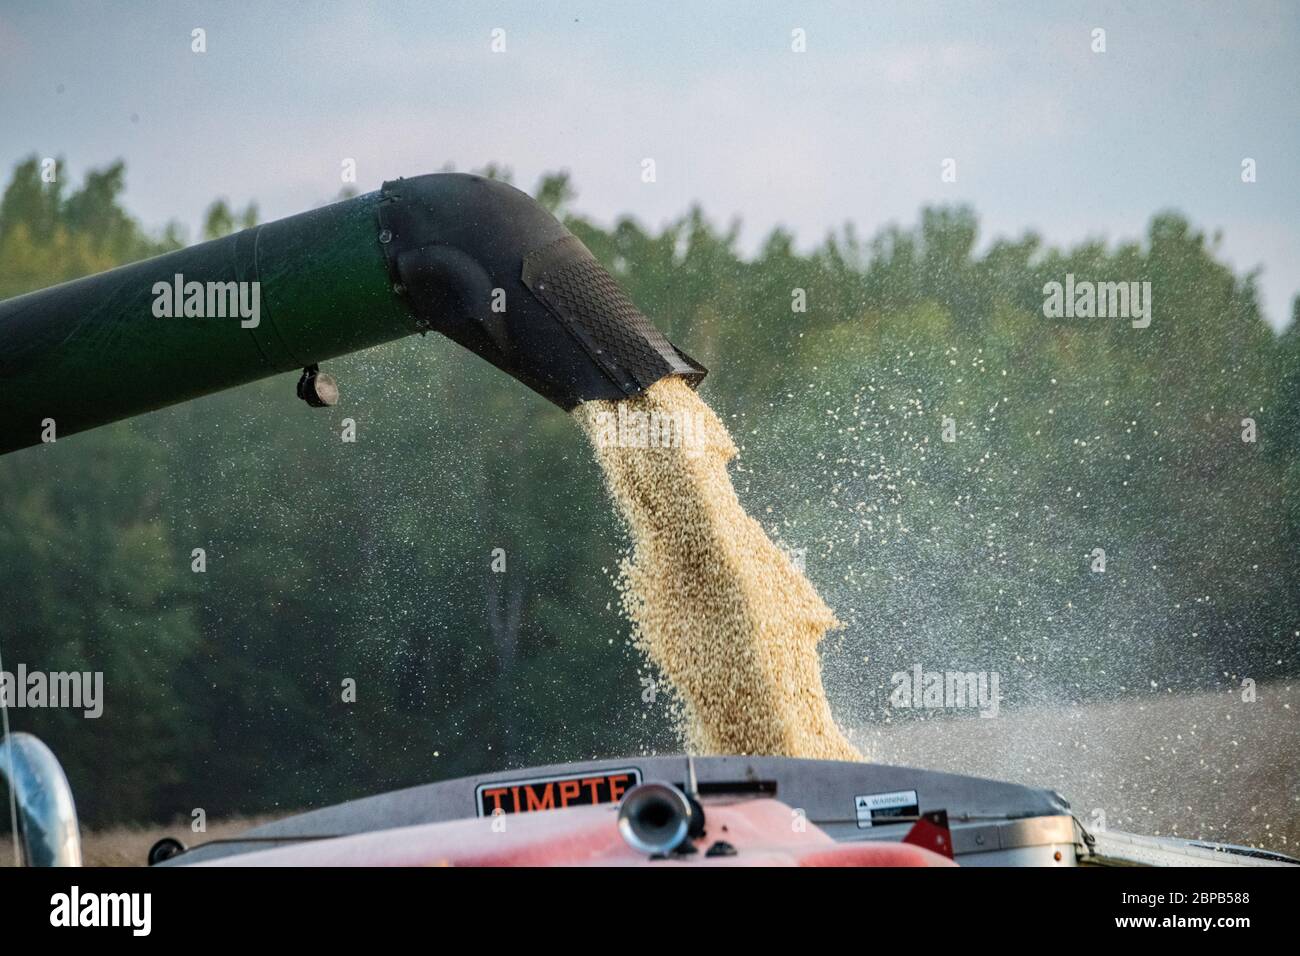 Renfroe Farms uses a GPS directed harvester to unload the corn crop at the family farm September 18, 2019 in Carroll County, Tennessee. The farm utilizes conservation practices developed with the USDA to balance land stewardship and production. Stock Photo